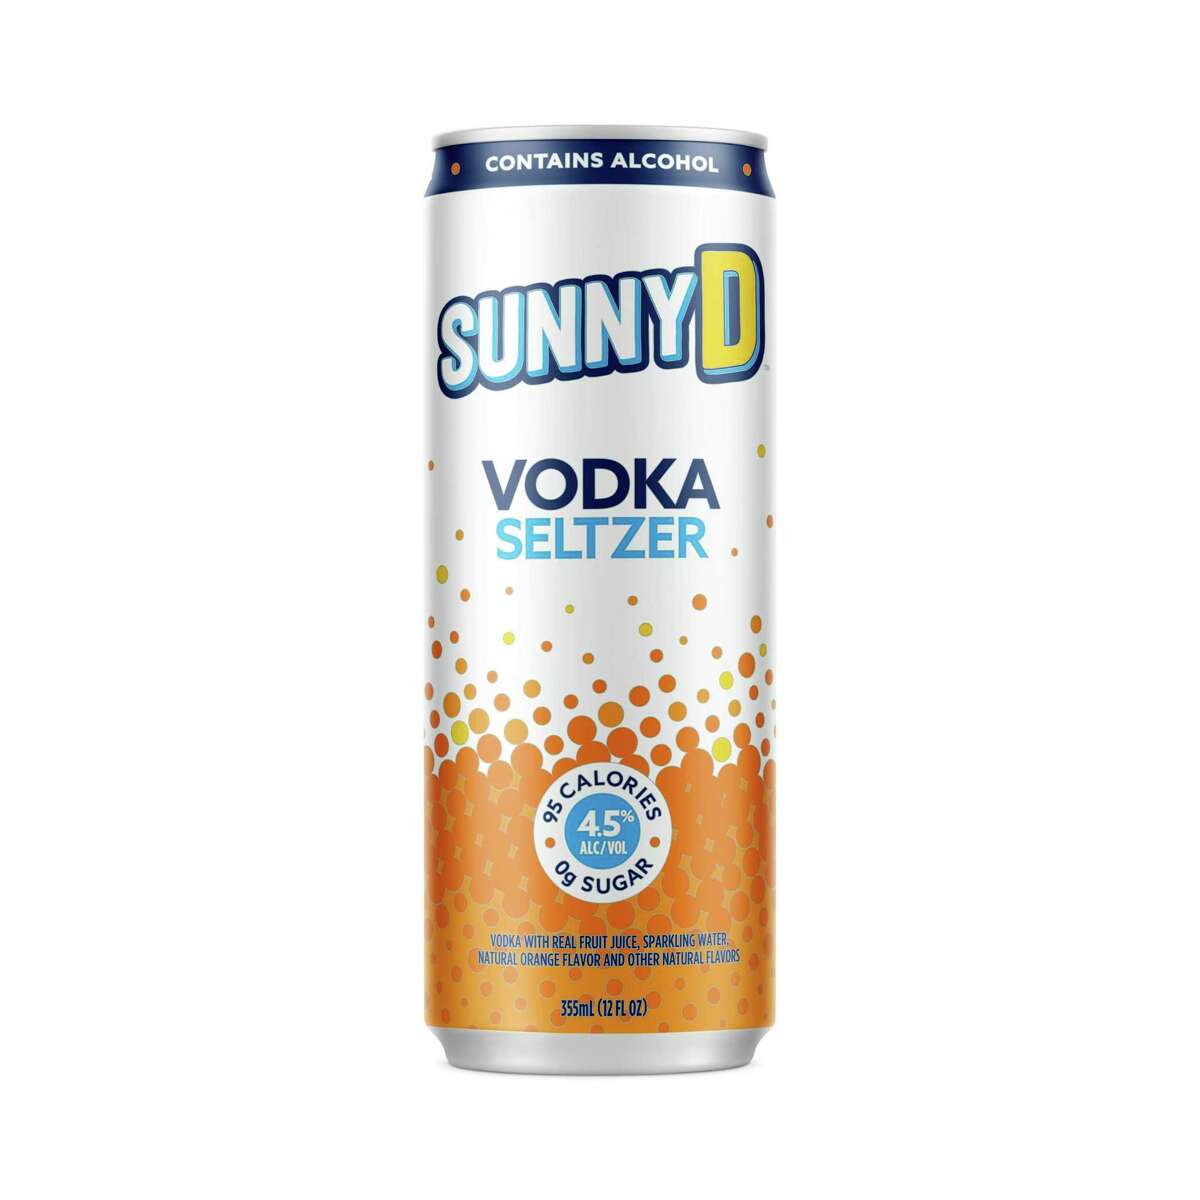 Juice brand SunnyD says it is introducing an alcoholic version of its orange-flavored beverage.